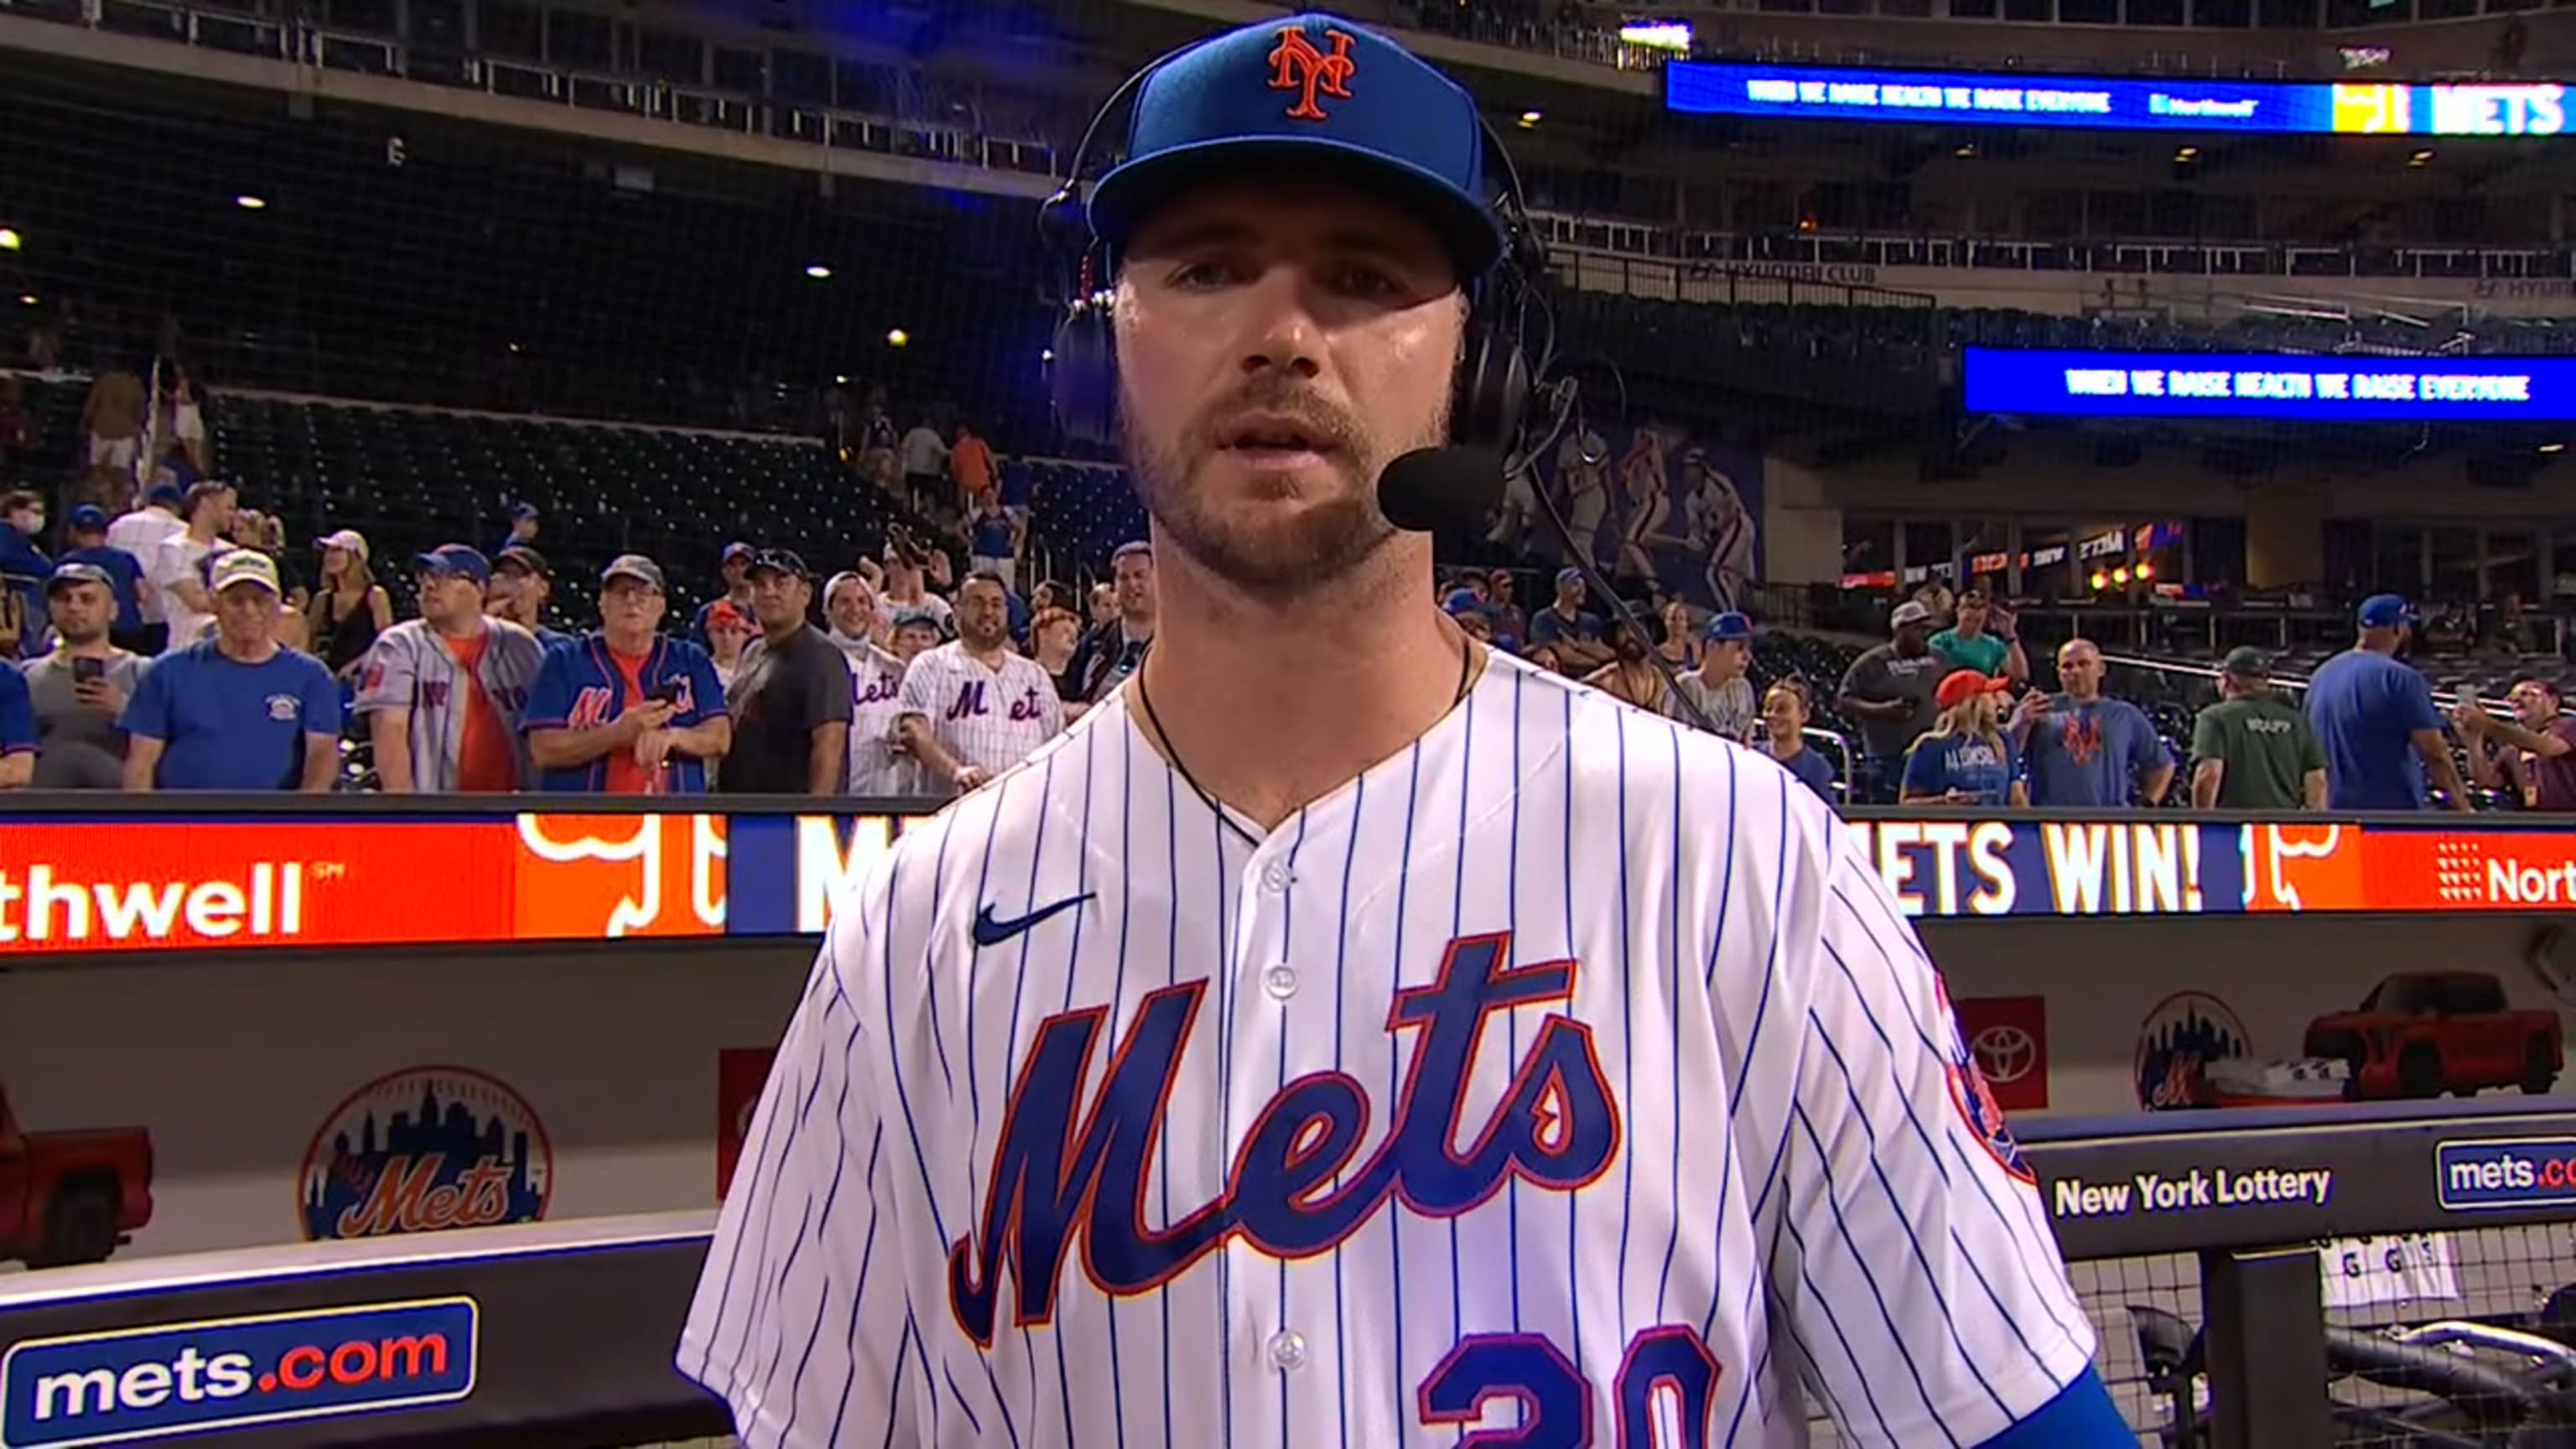 MLB Scores: Mets , Yankees 3—Pete Alonso, who is SO back, leads Mets to win  - Amazin' Avenue